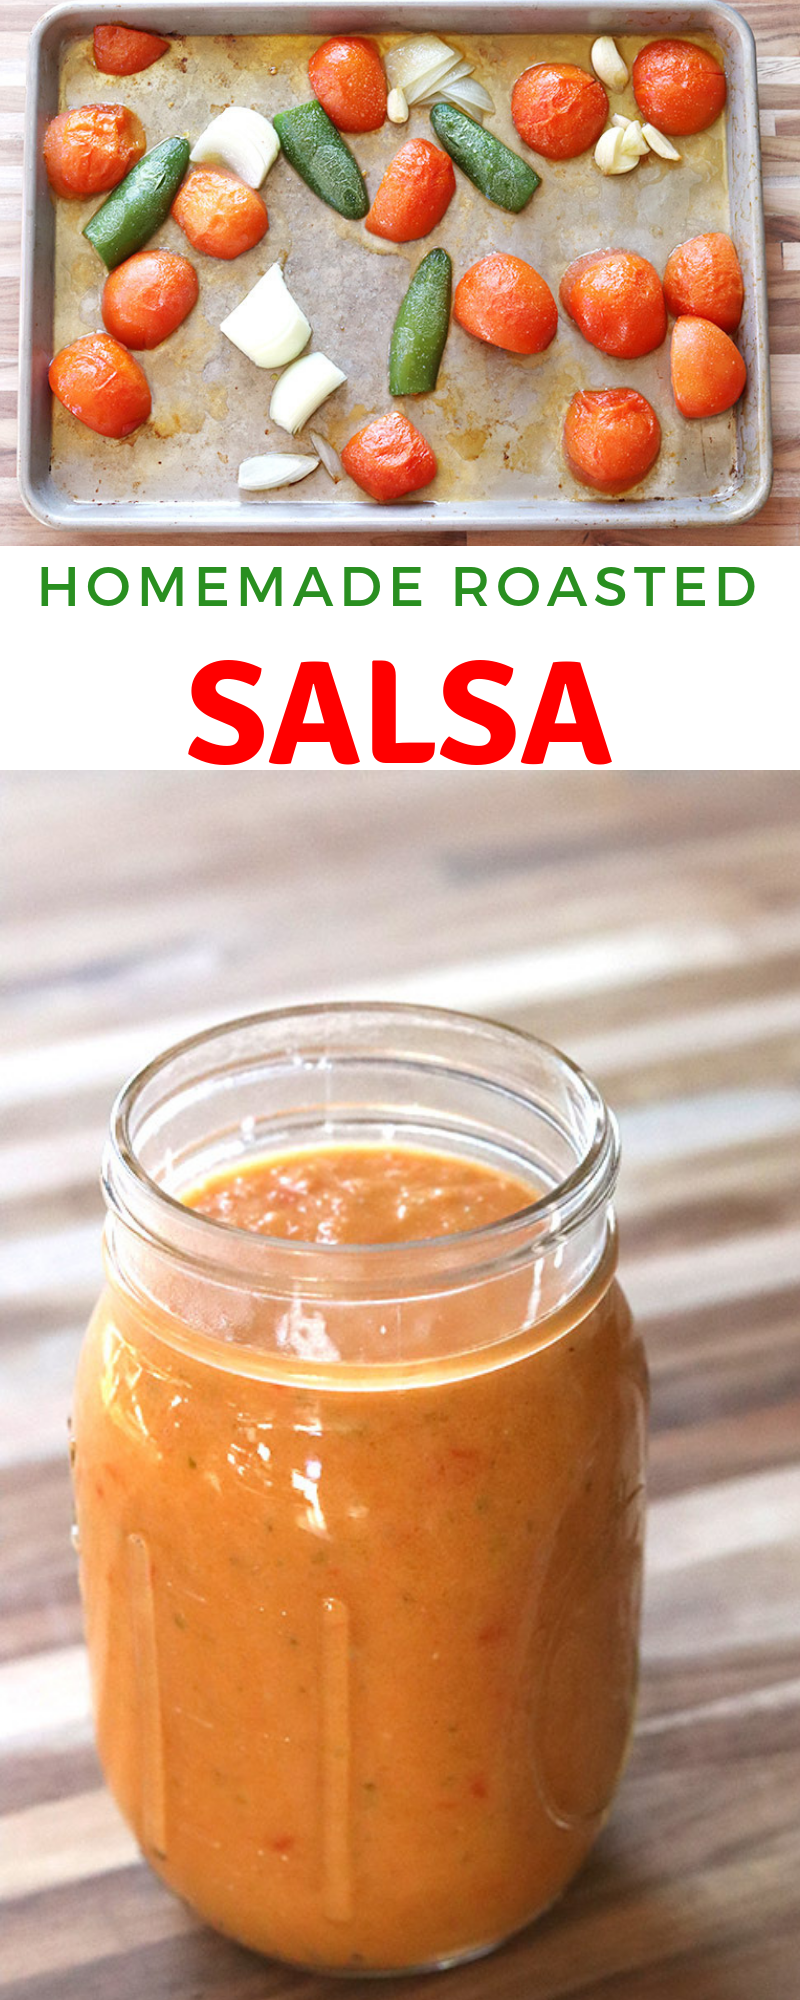 This is the best homemade salsa I have tried! You just blend roasted tomatoes, jalapenos, garlic, and onions together.  SO YuM!